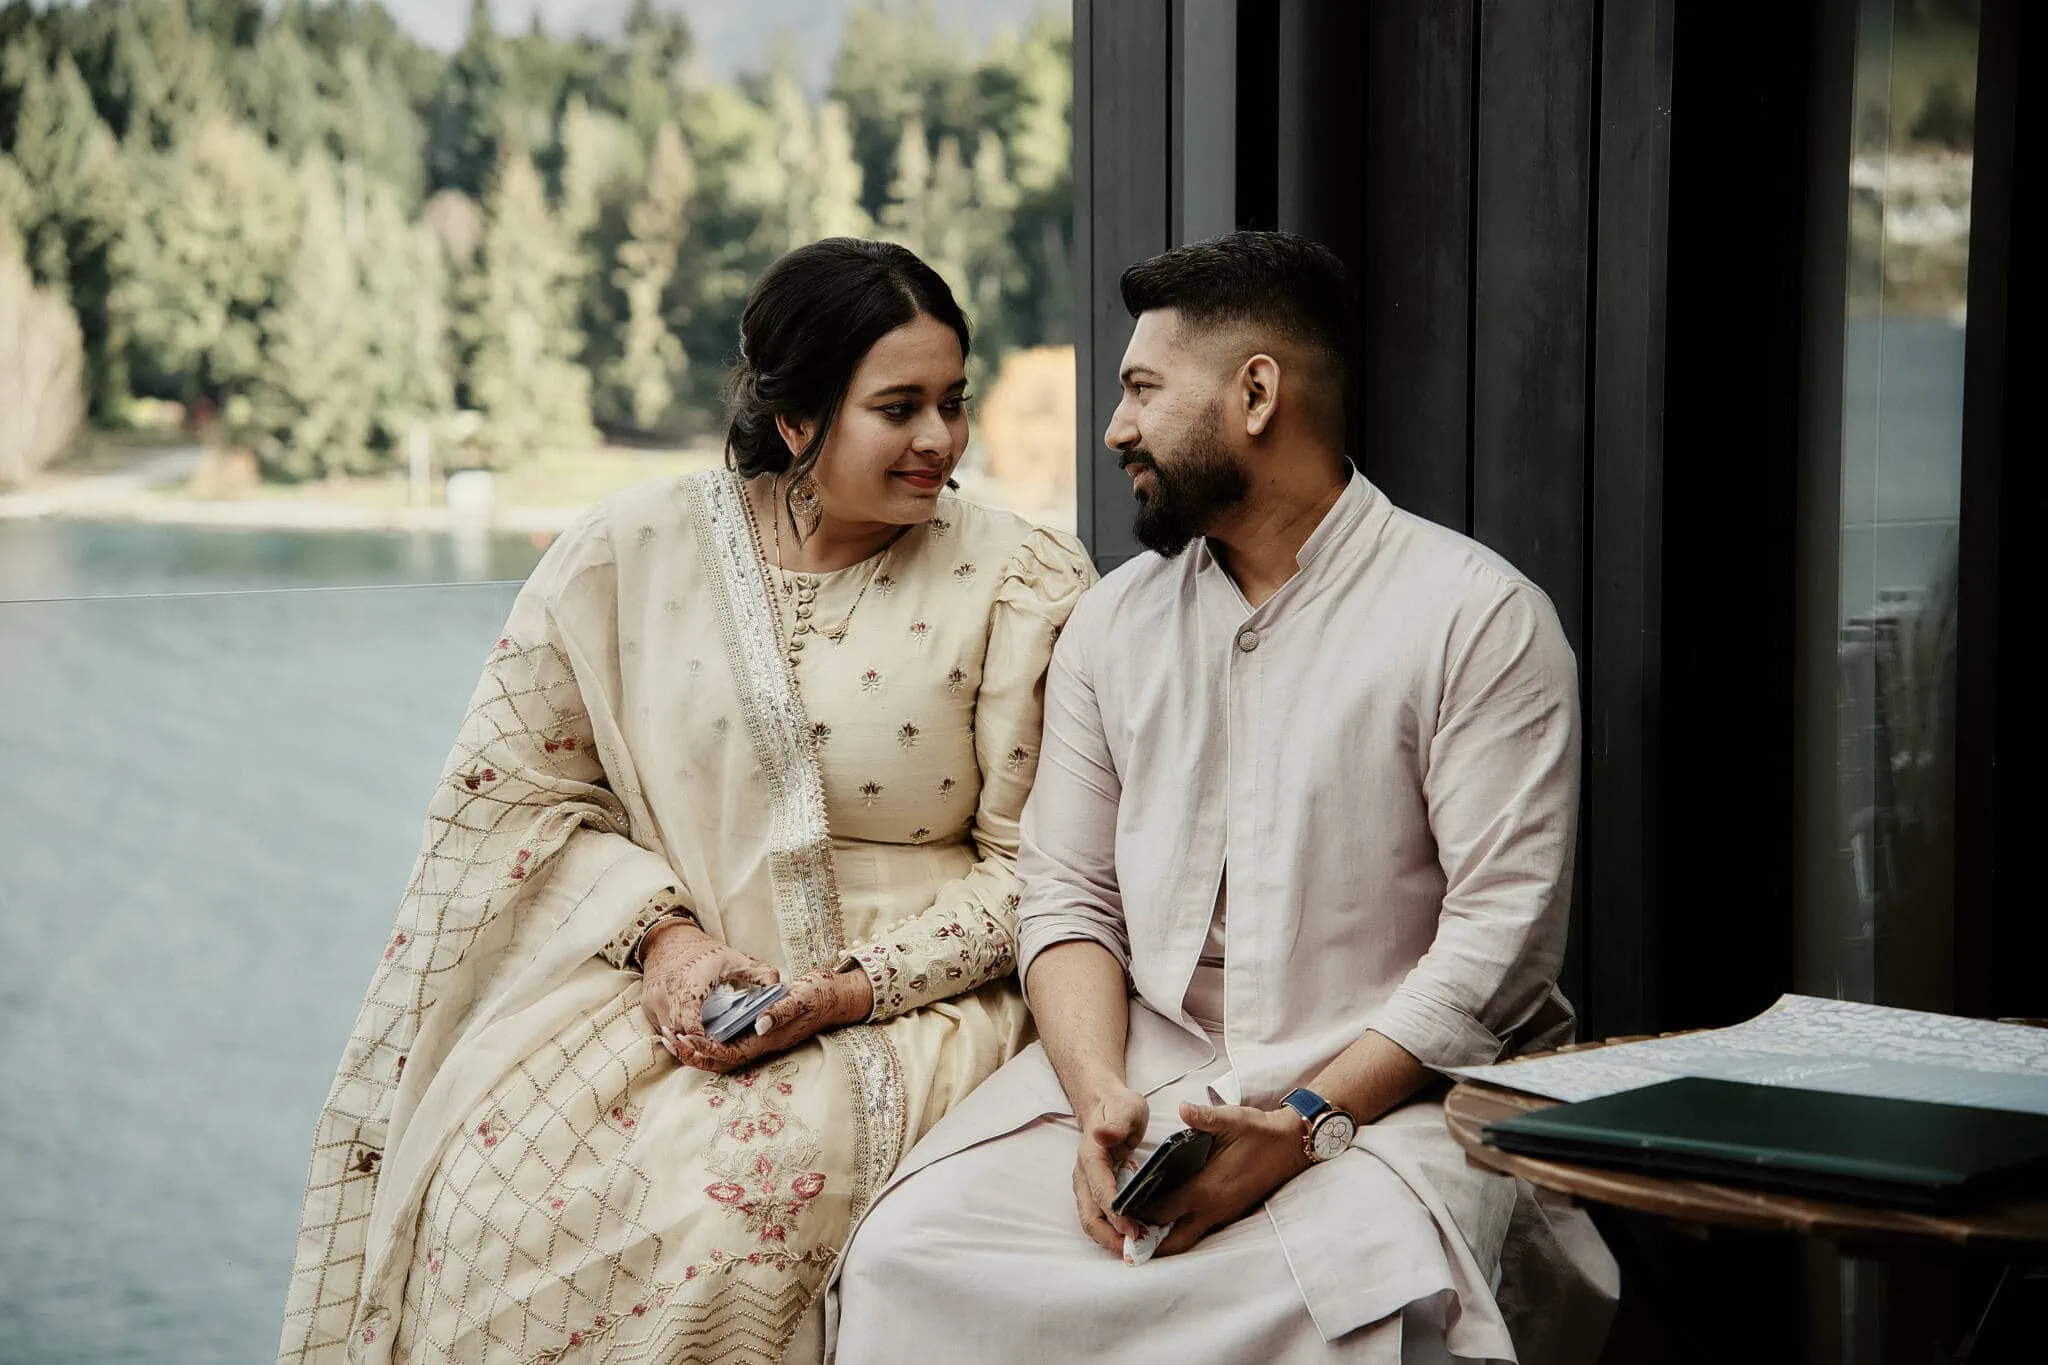 Queenstown New Zealand Elopement Wedding Photographer - Wasim and Yumn's Islamic wedding in Queenstown, with a man and woman sitting on a bench next to a lake.